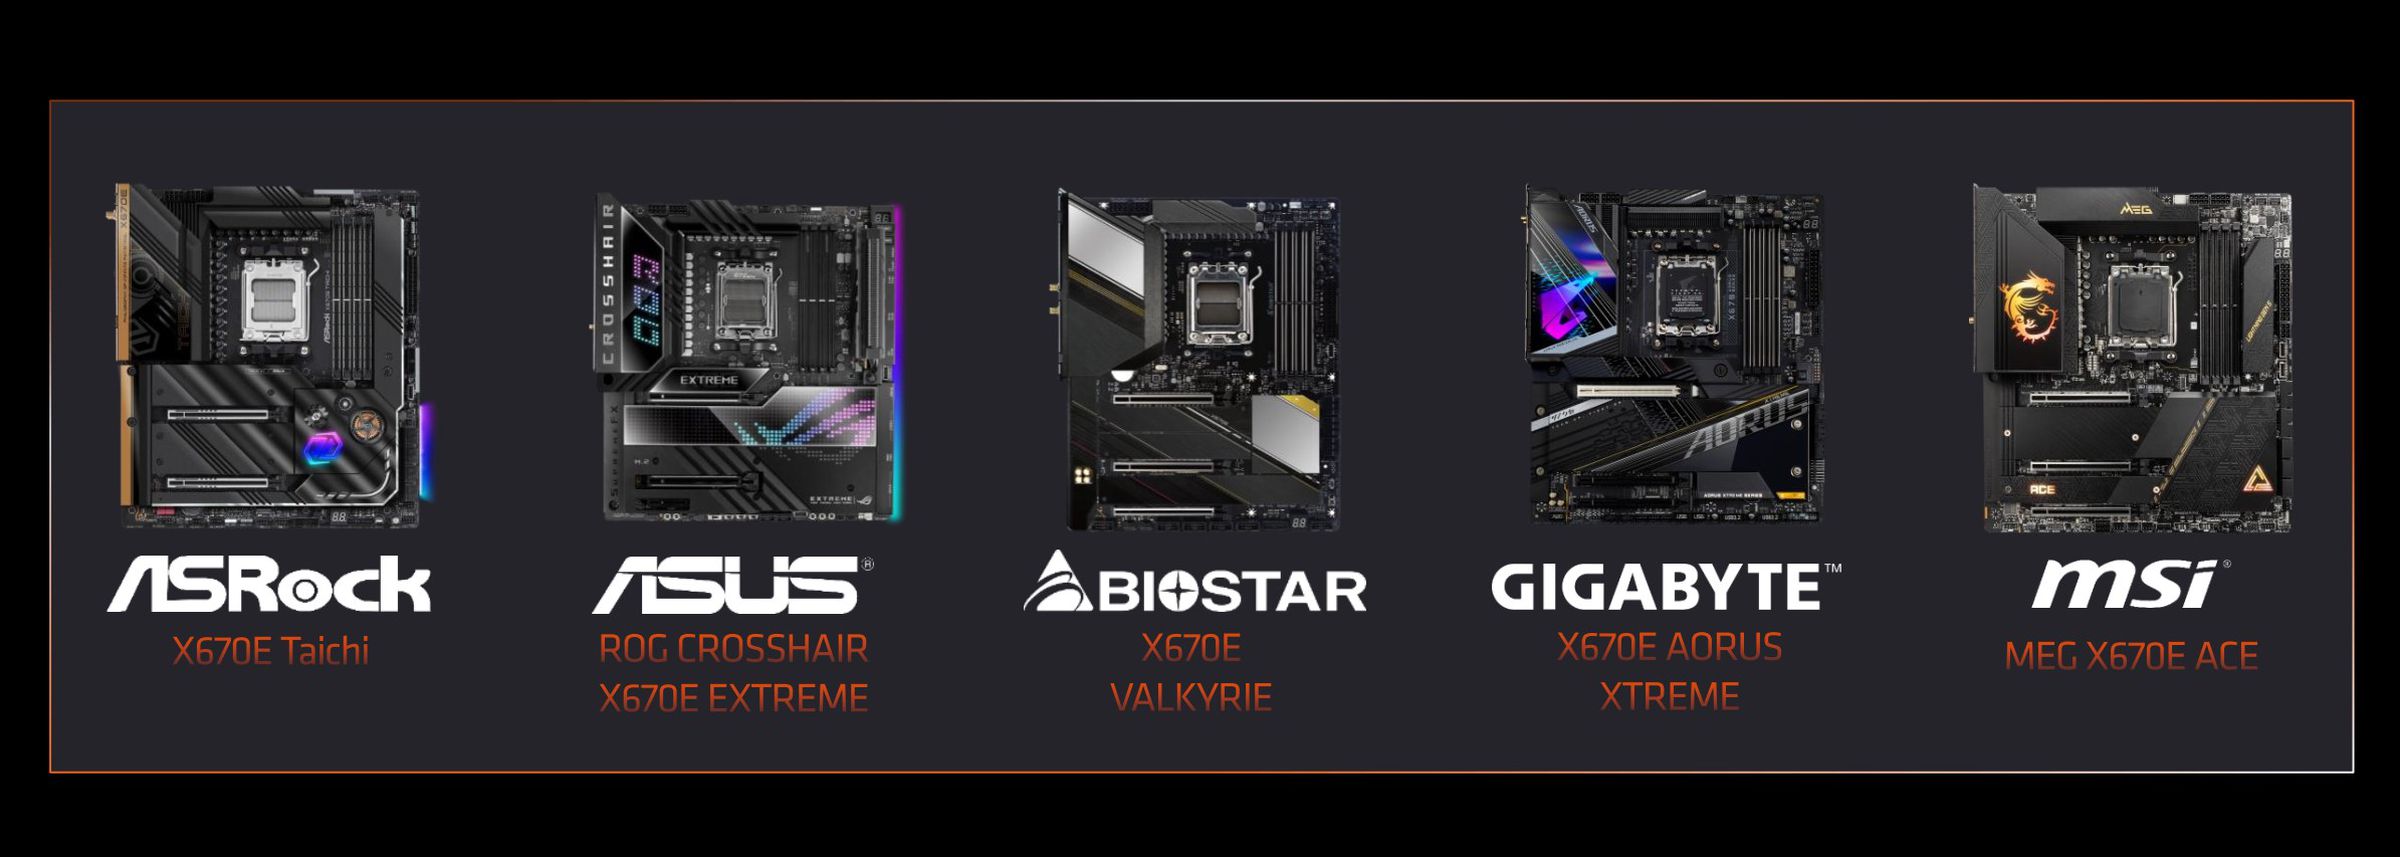 ASRock, Asus, Biostar, Gigabyte and MSI will all have AM5 motherboards, as you’d expect.